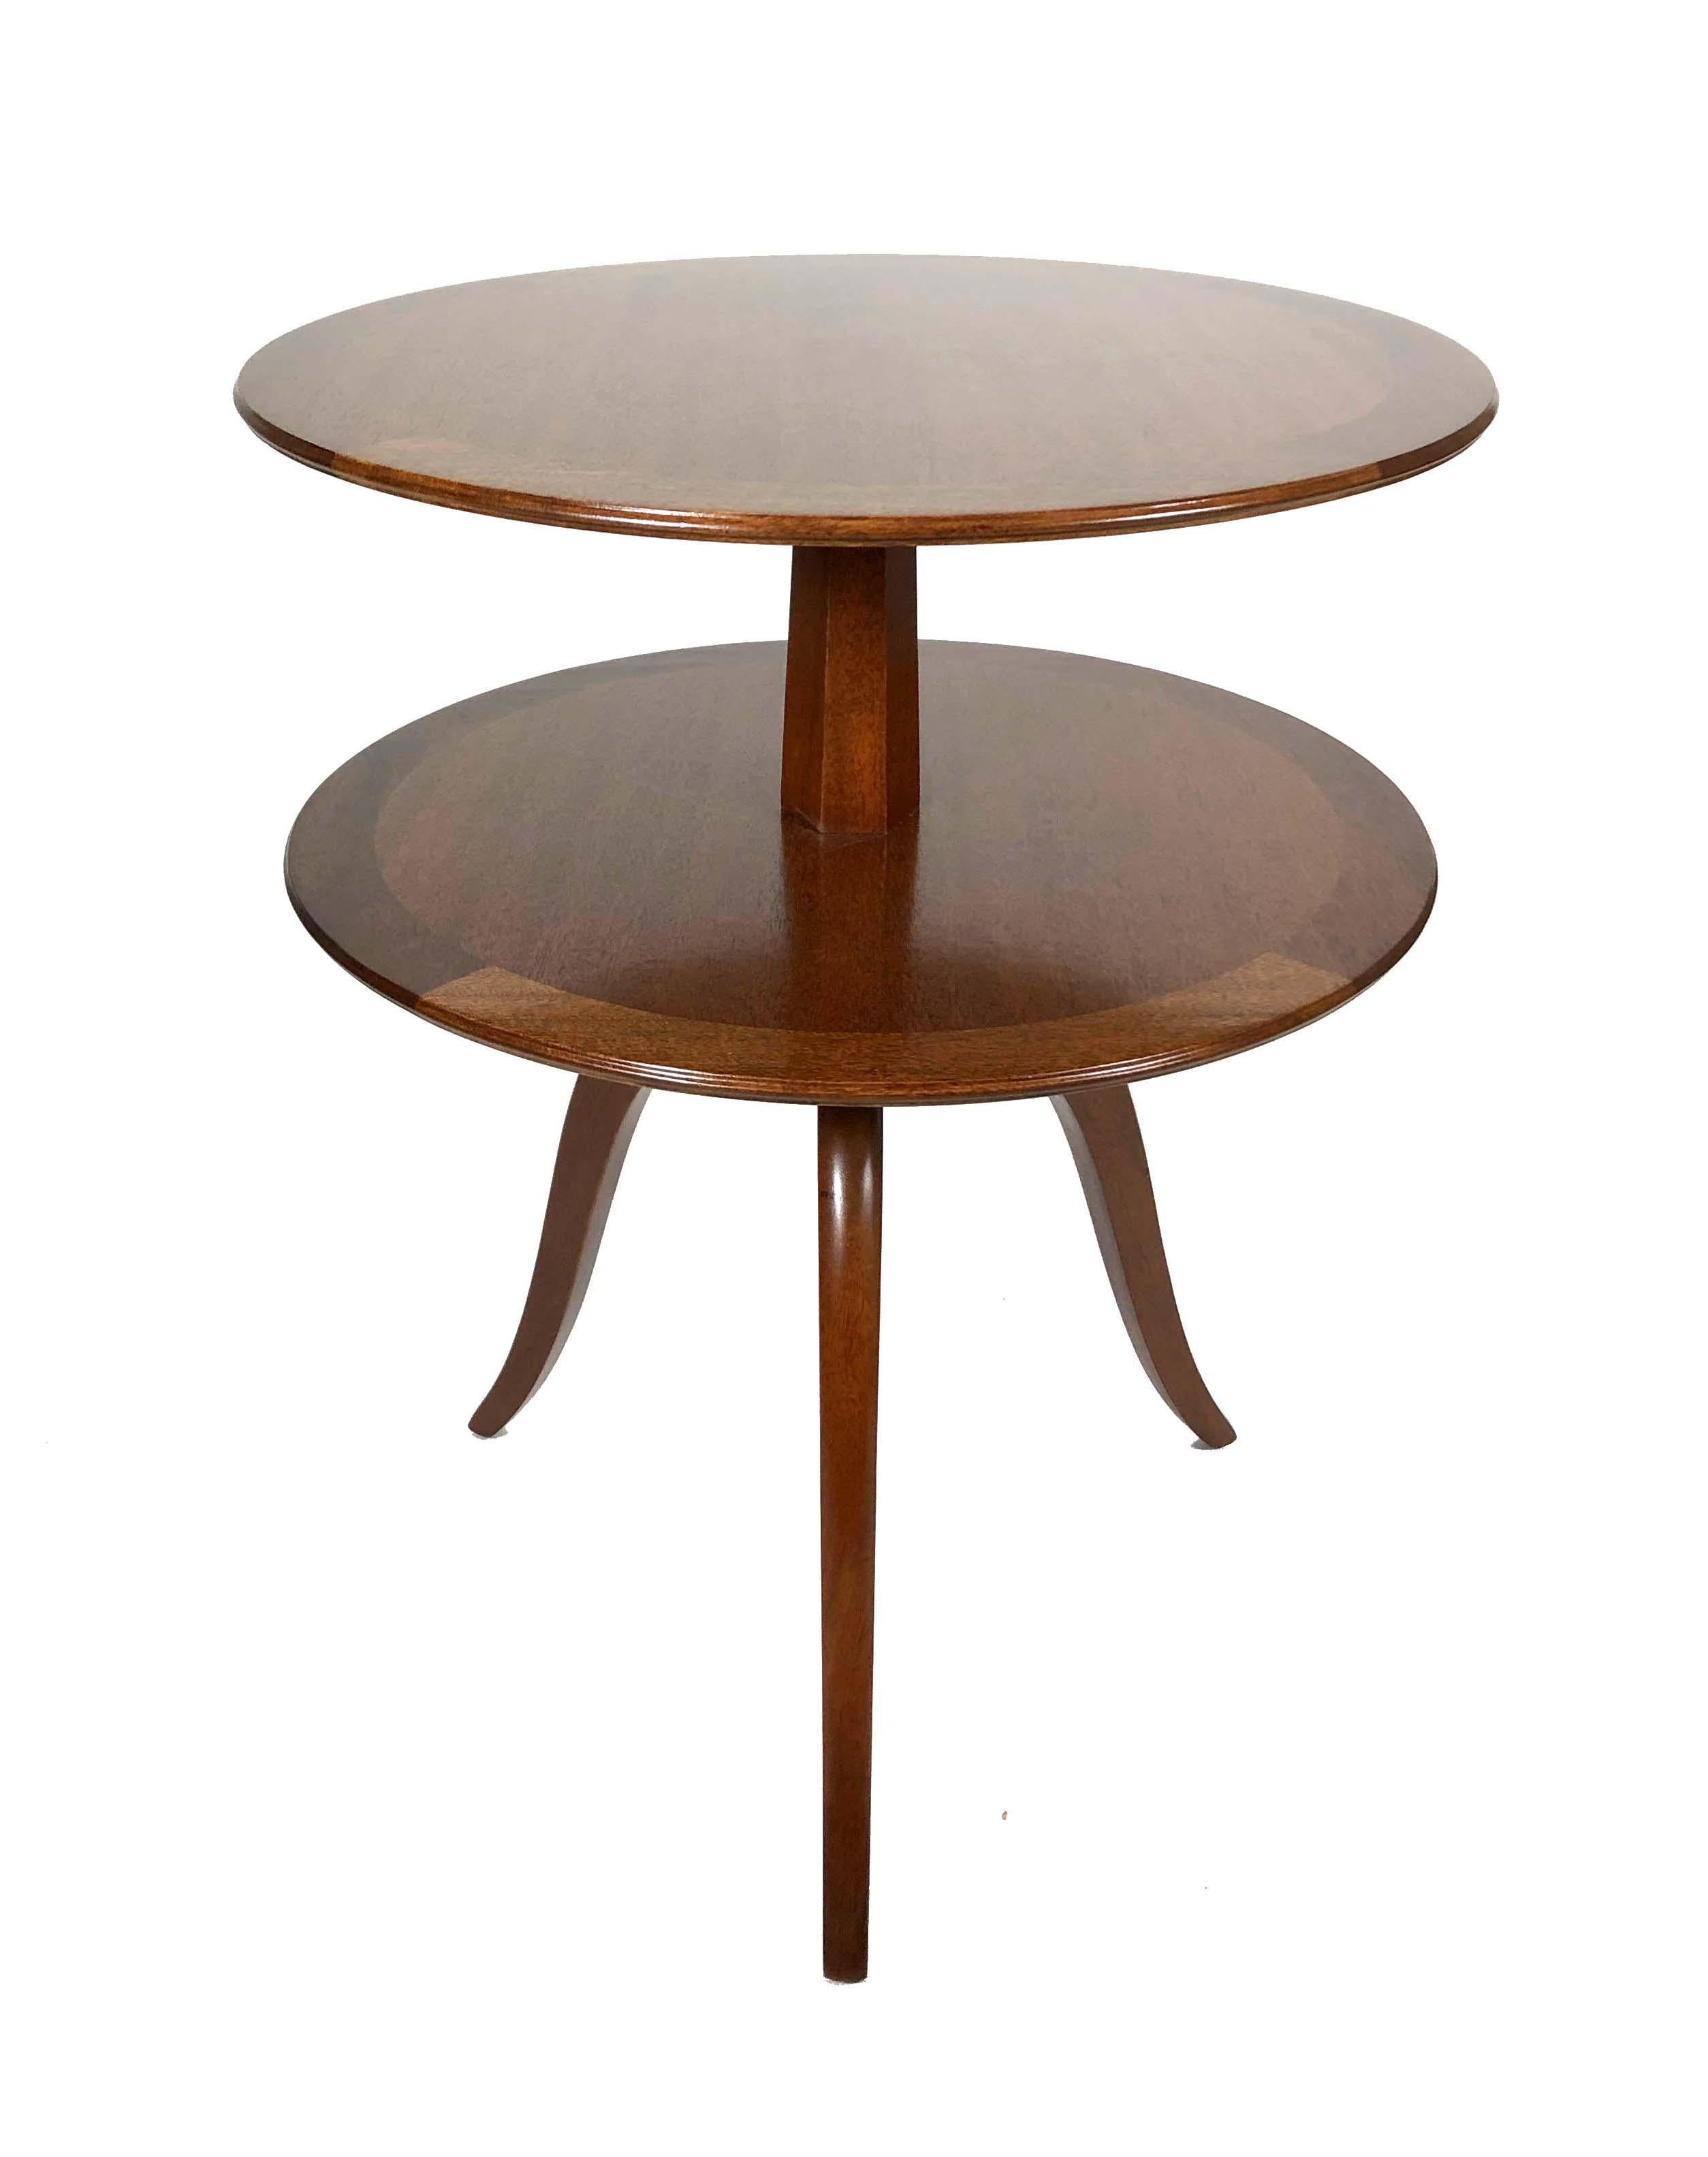 American Two-Tier Mahogany Side Table by Edward Wormley for Dunbar